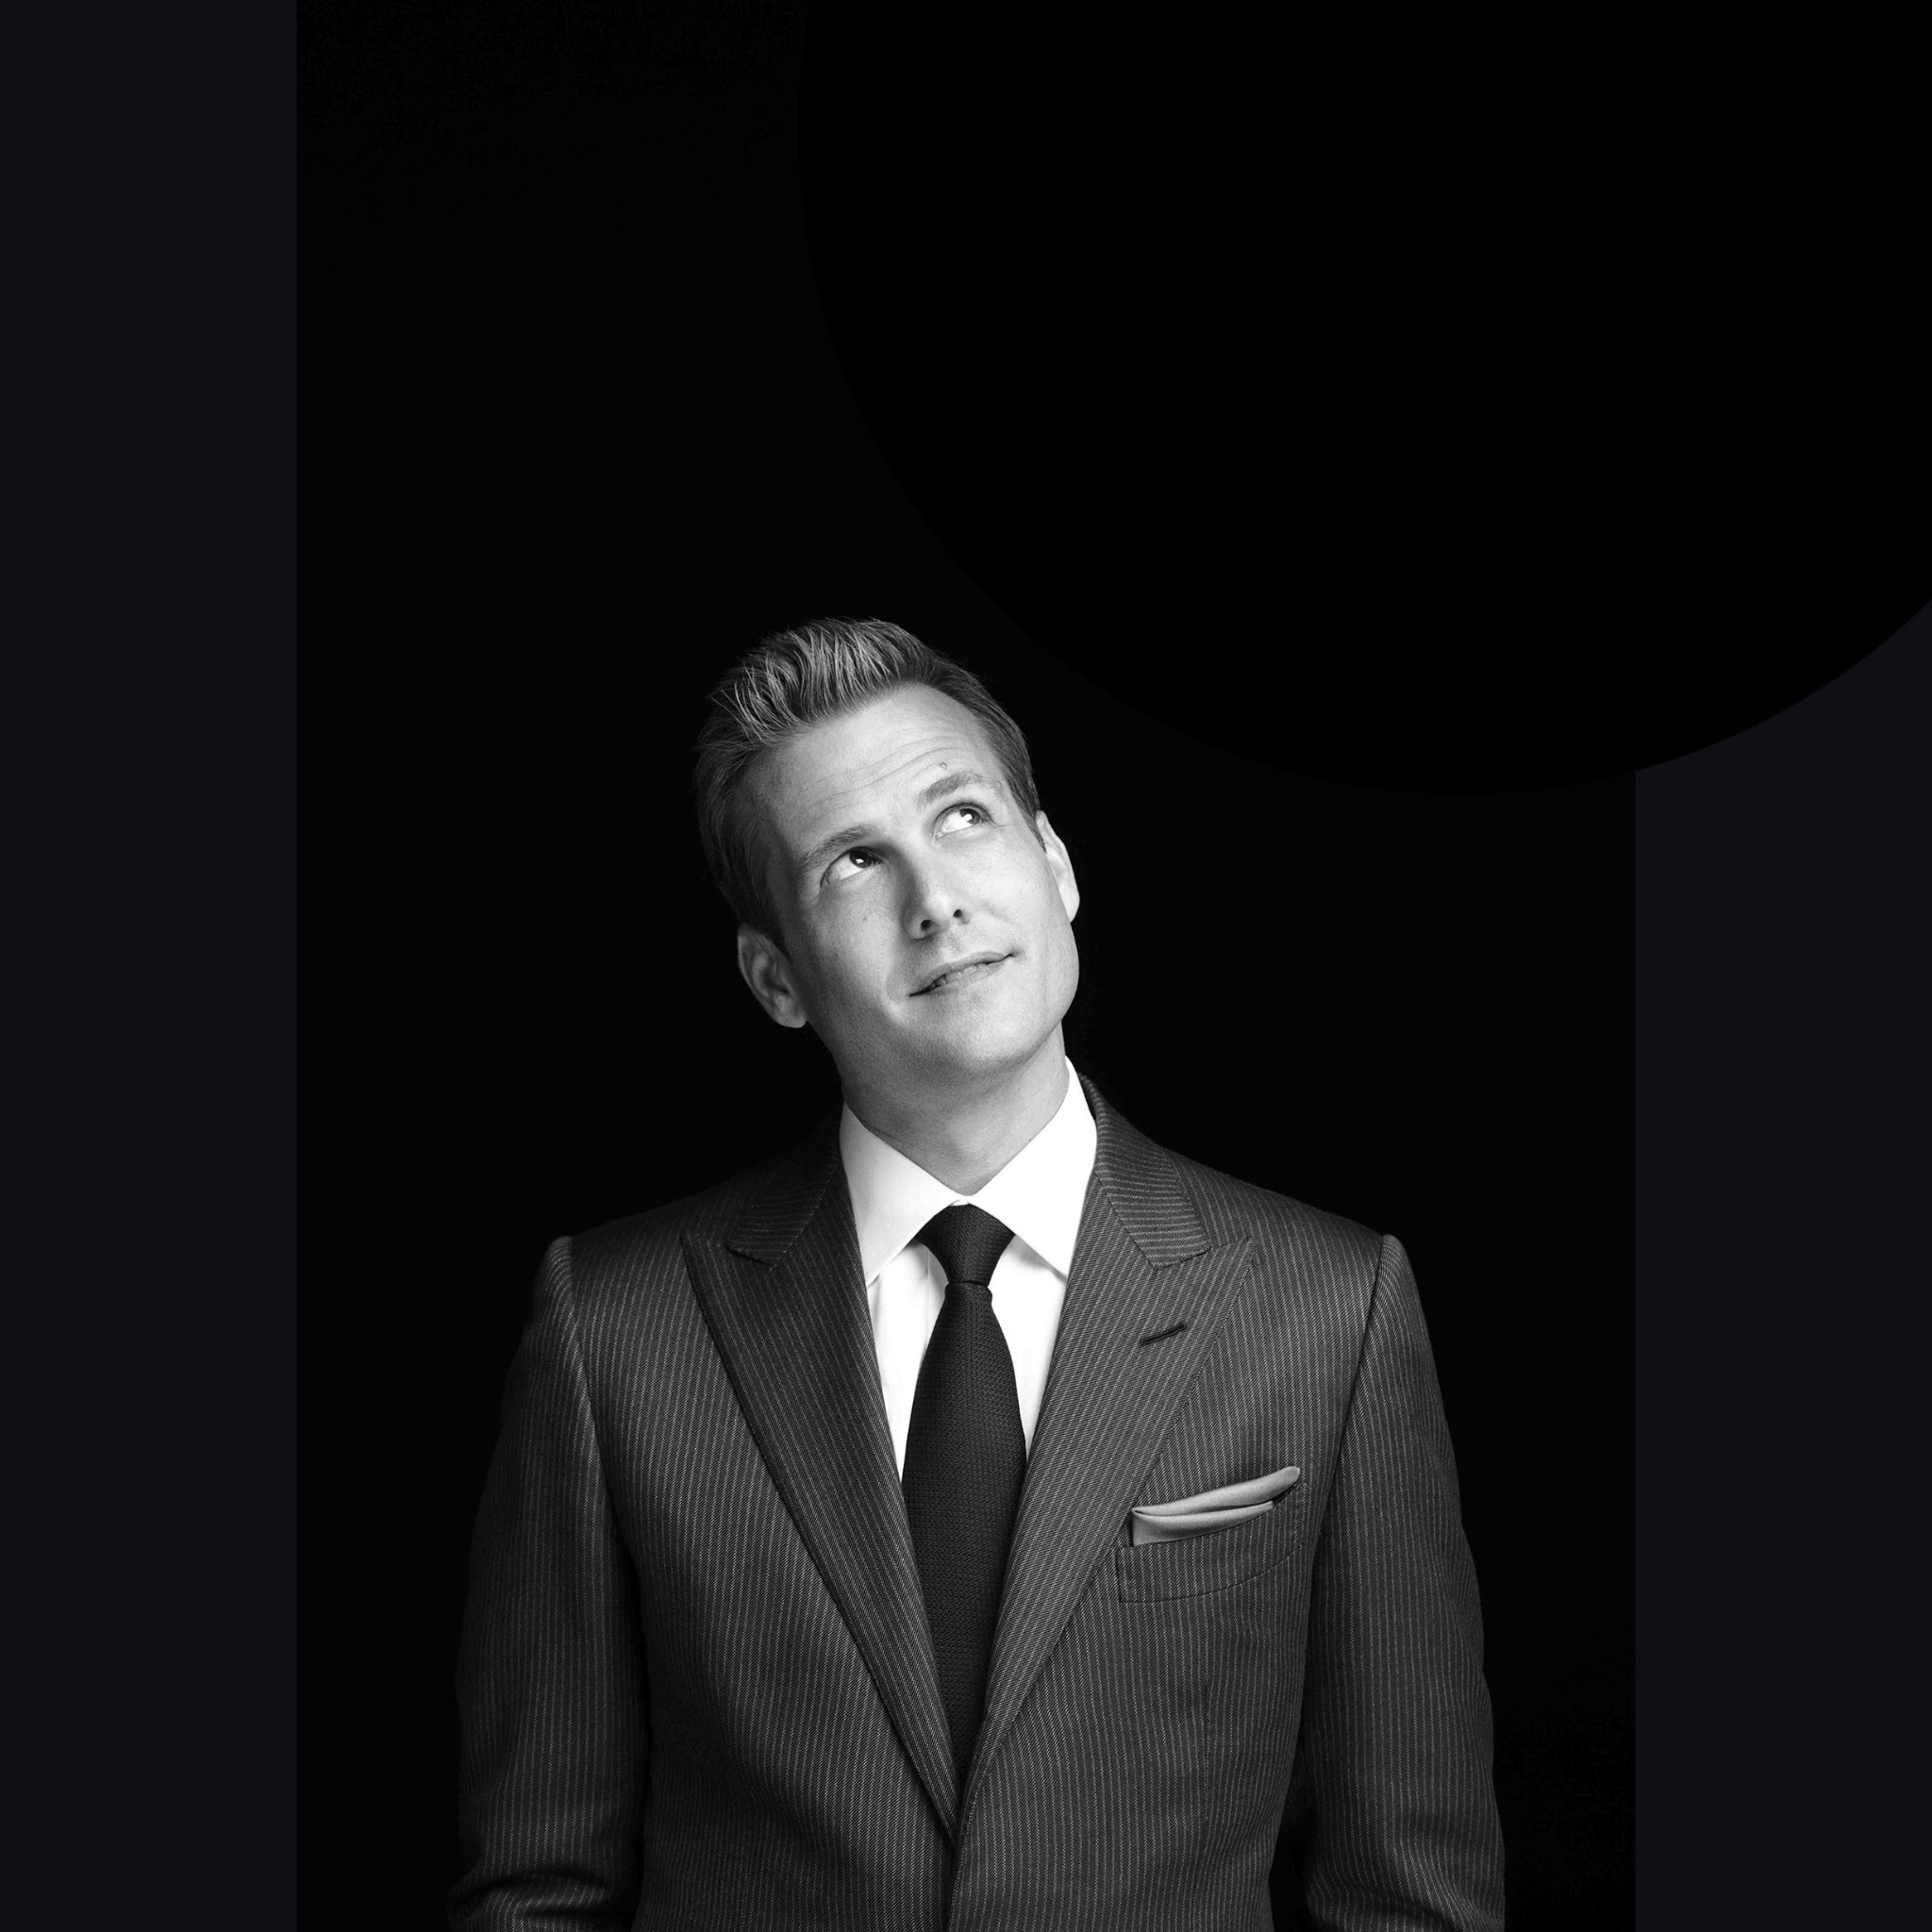 Suits Harvey Specter Dark - Harvey Specter You Always Have A Choice -  2048x2048 Wallpaper 